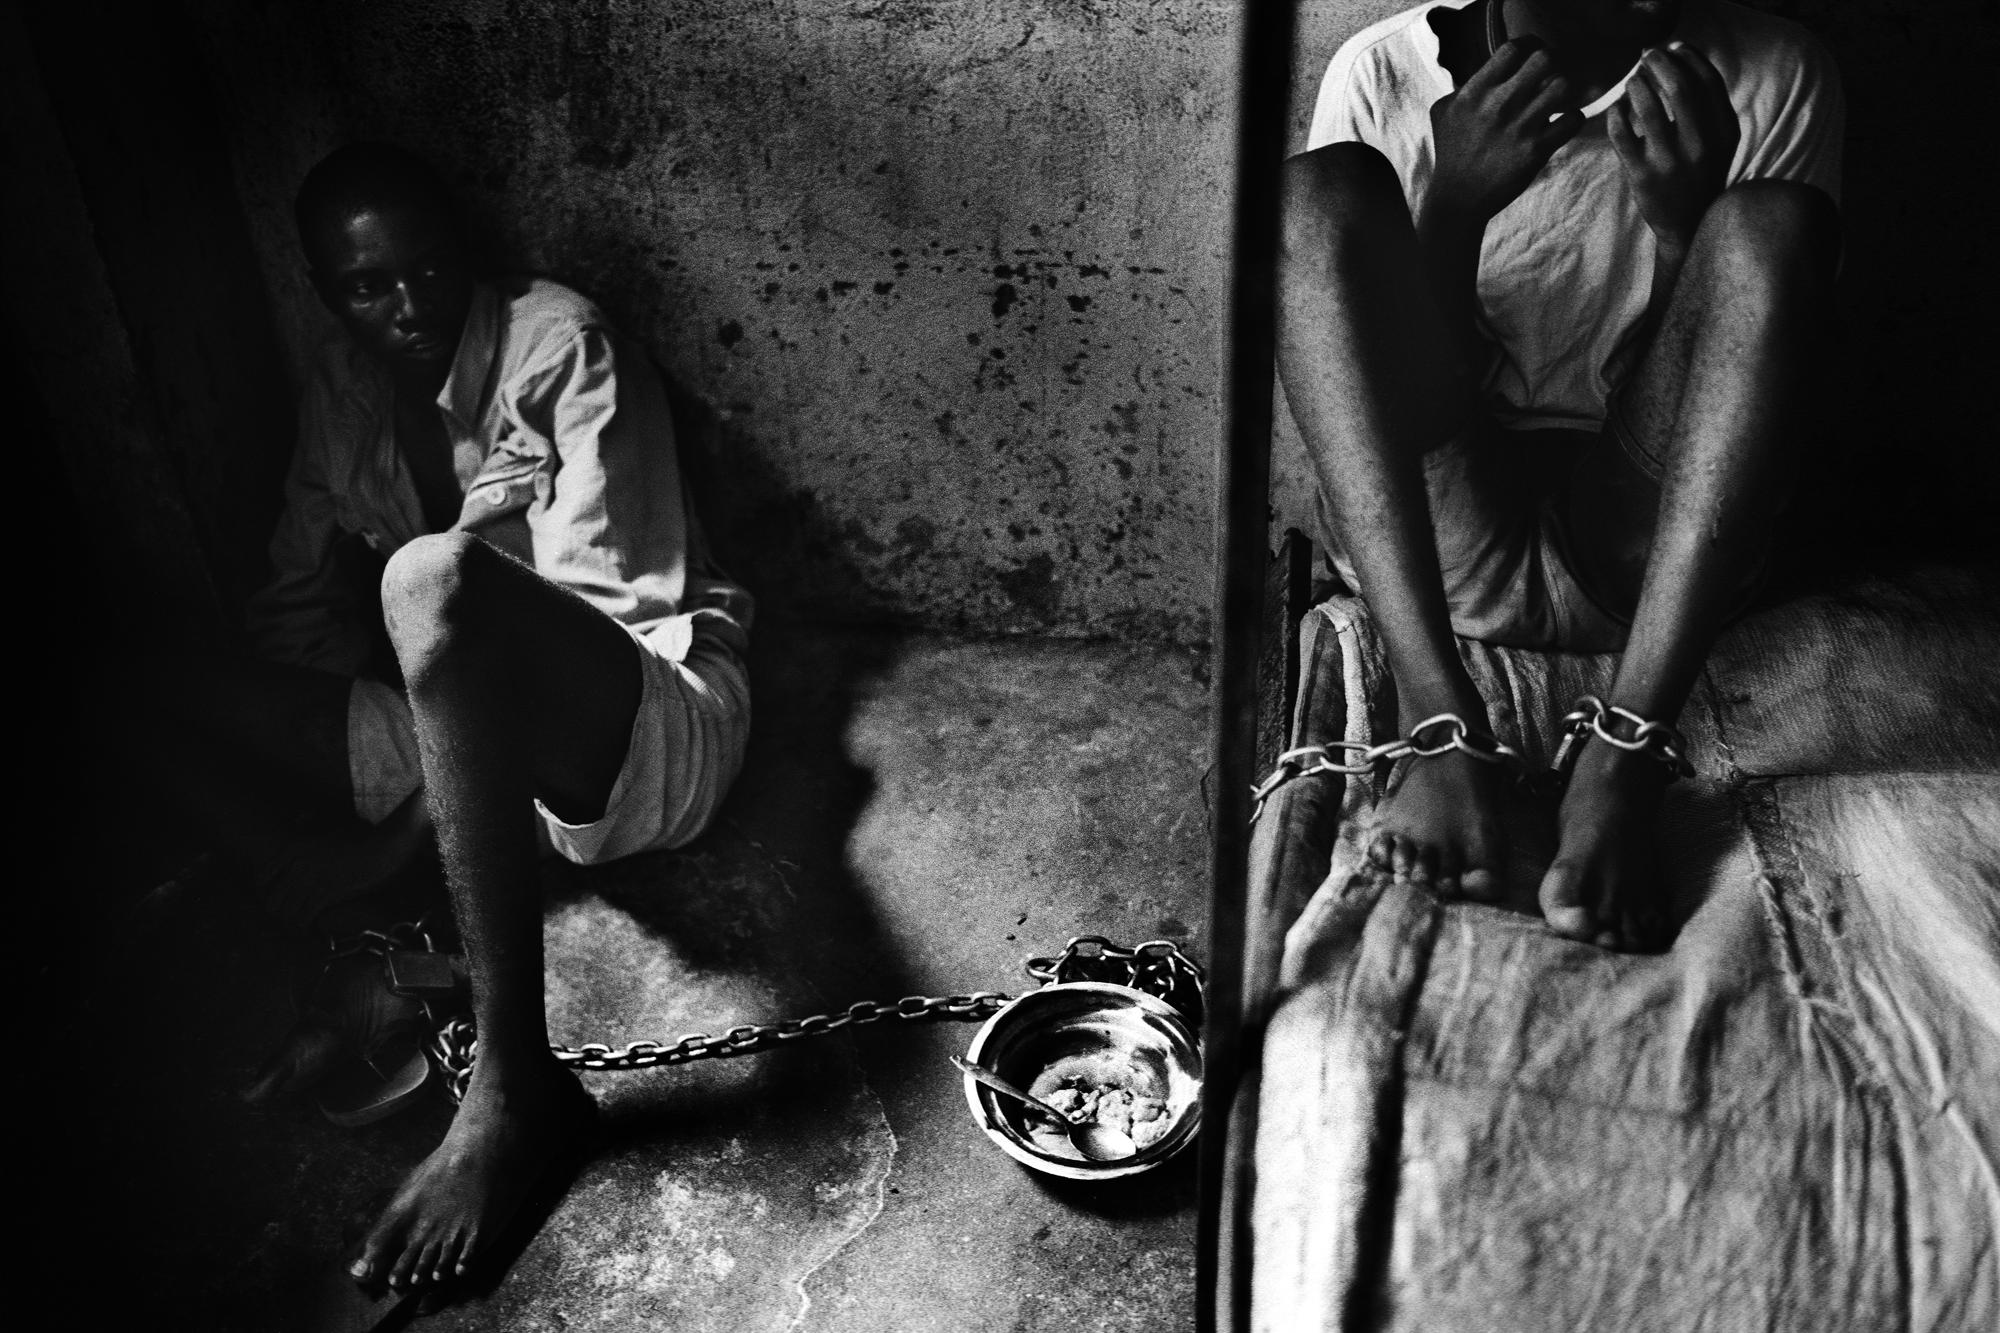 City of rest - SIERRA LEONE Freetown.
August 2007.
Two chained inmates...